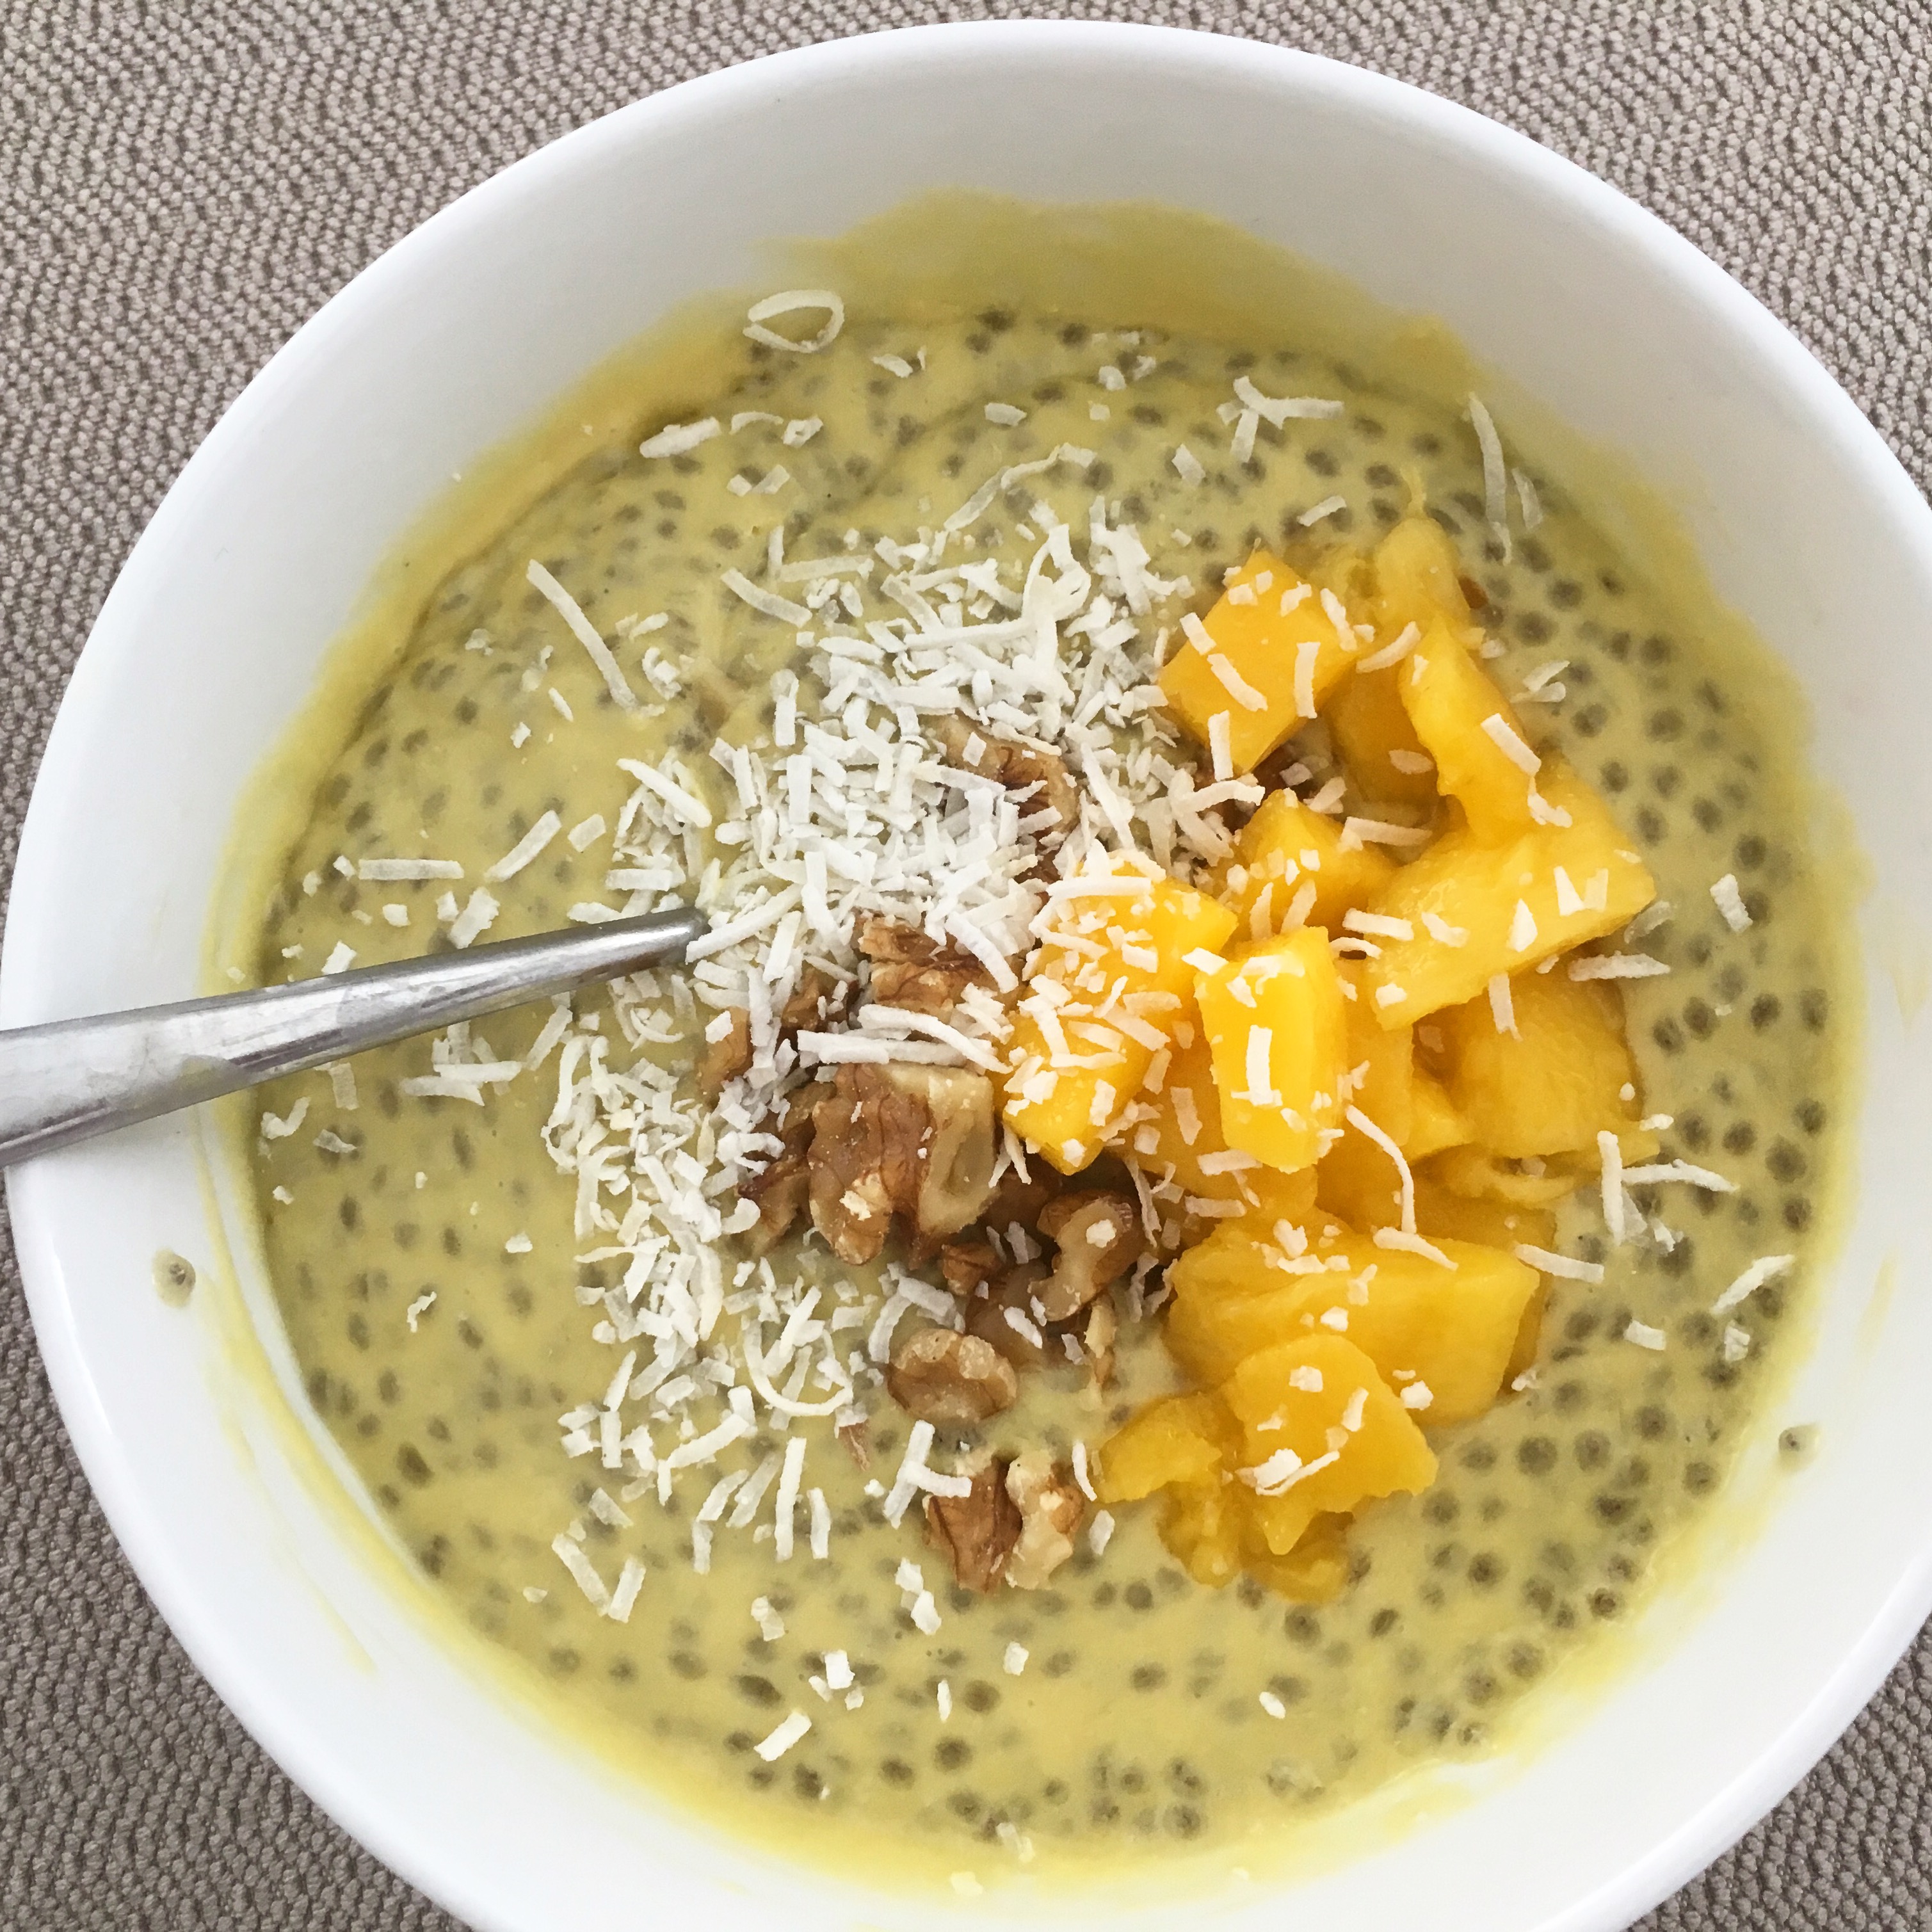 This creamy mango chia pudding makes a delicious, healthy breakfast